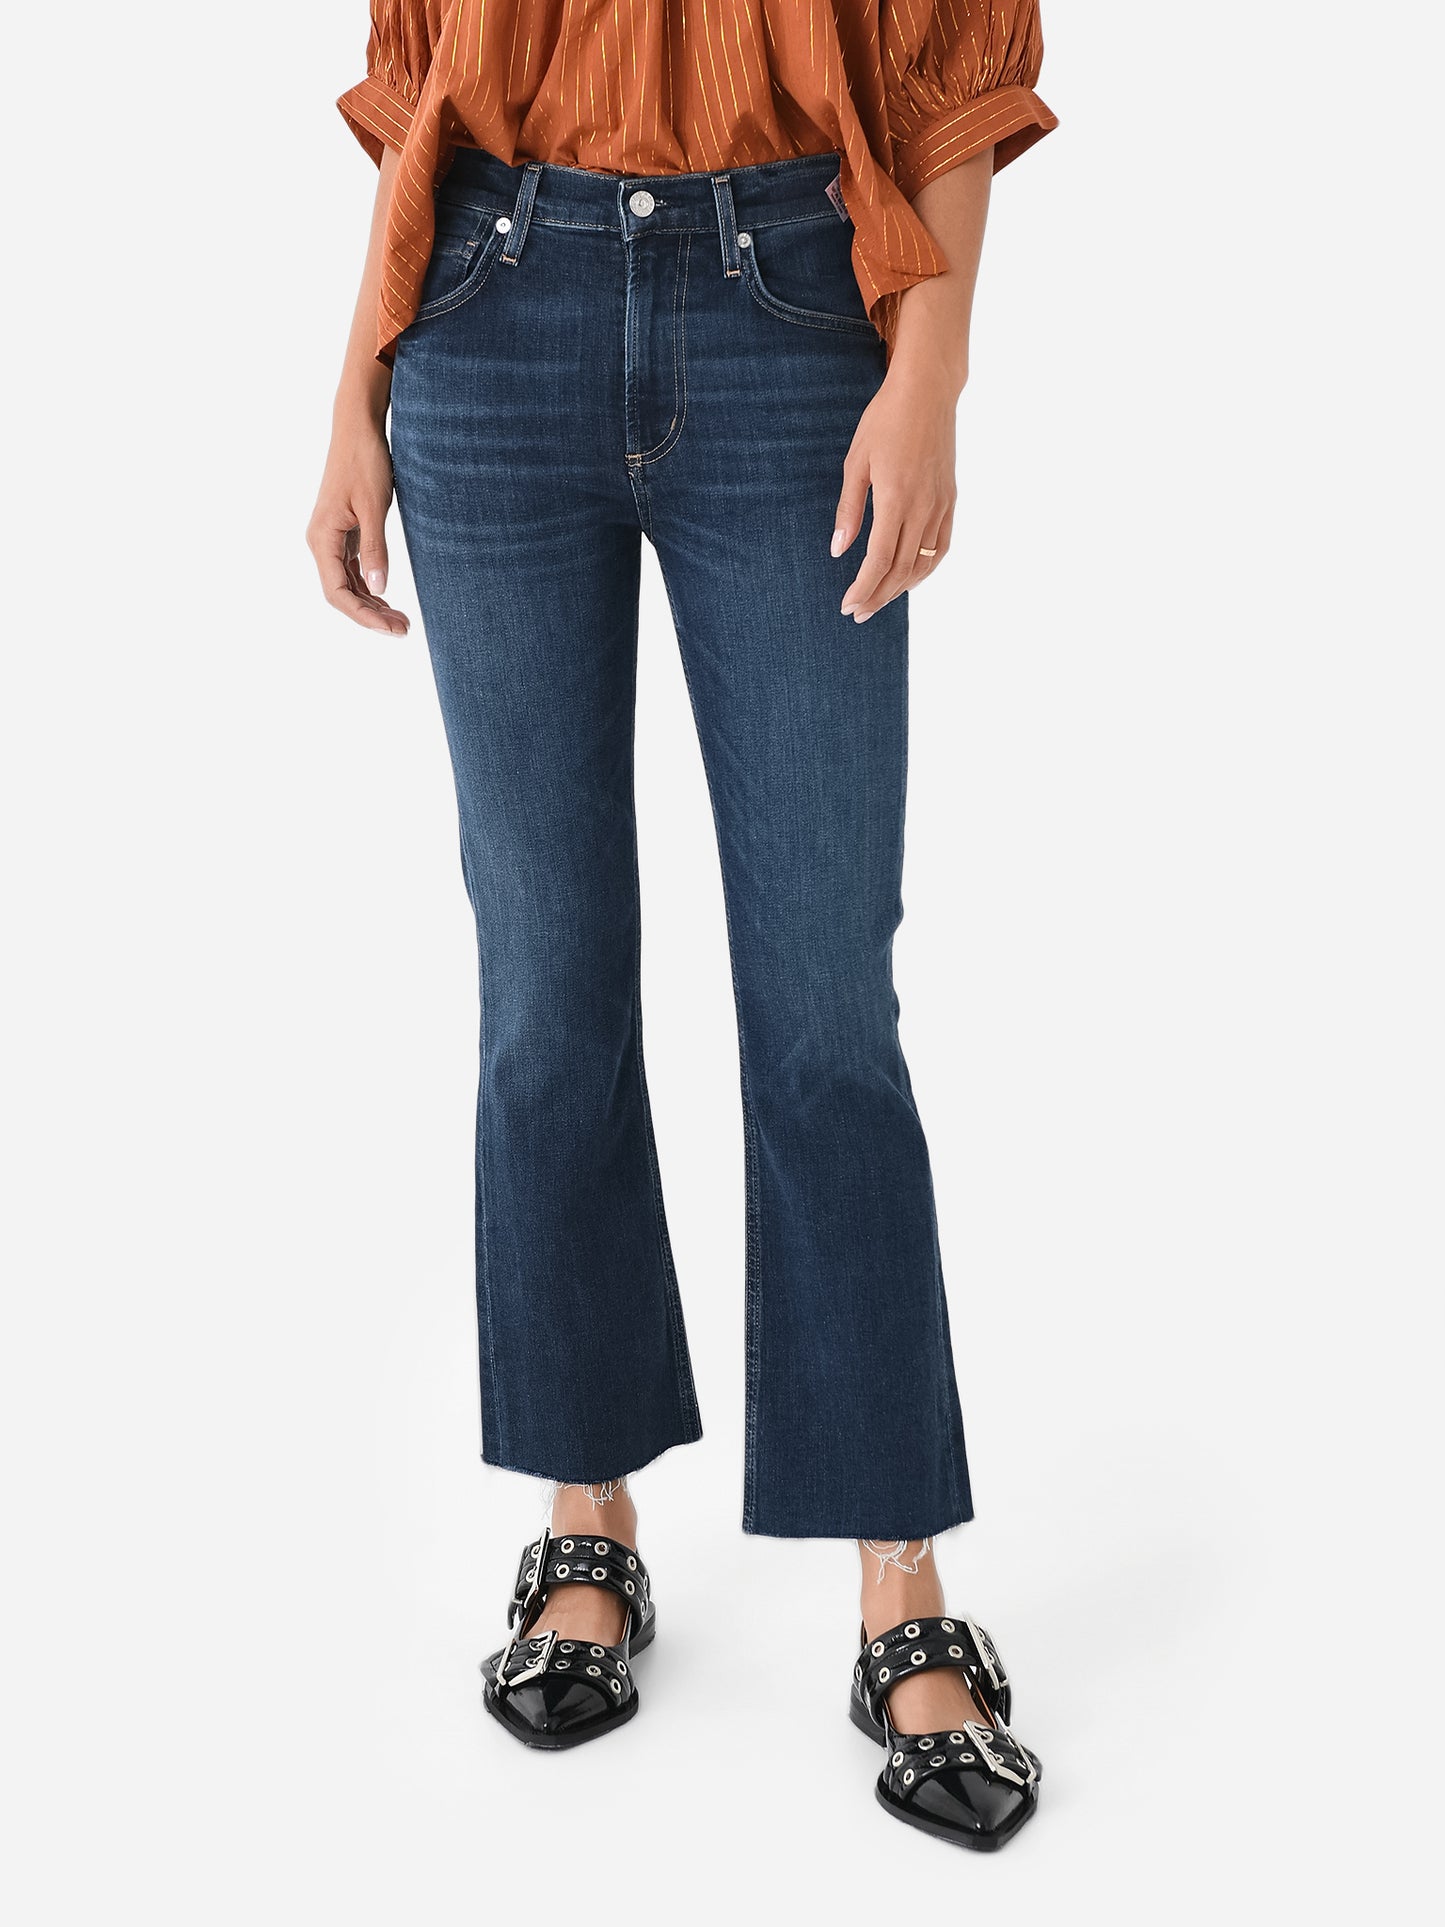 Citizens Of Humanity Women's Isola Bootcut Jean